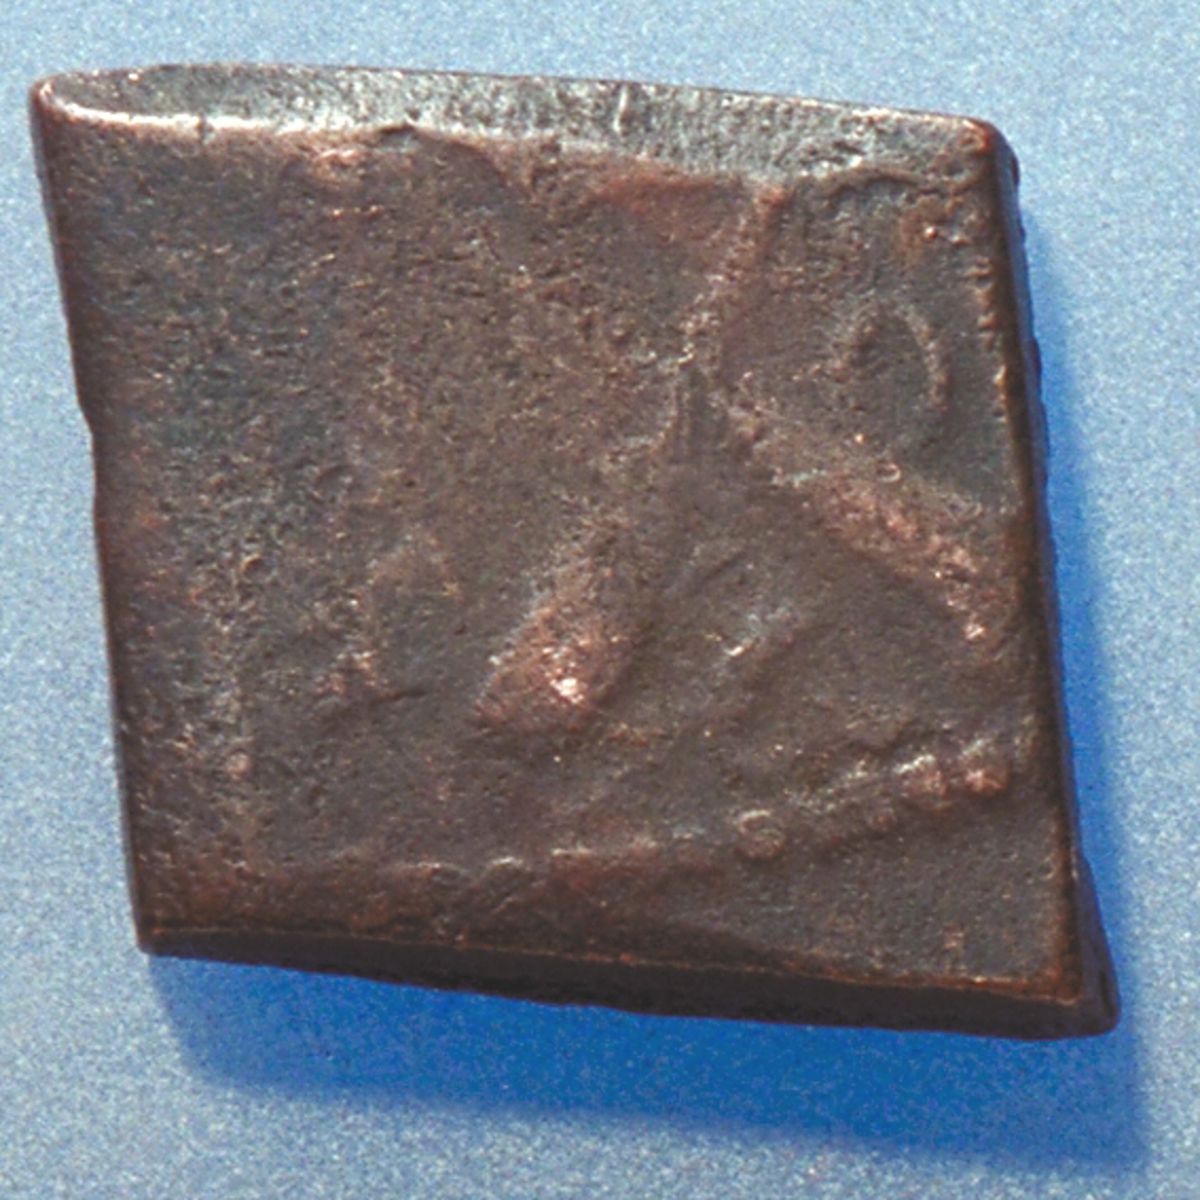 Â½- öre

Fyrkantigt mynt.

Bra skick, men slitet.

Vikt: 13,4 gram.



Text in English: Square-shaped coin. Denomination: Â½ - öre.

The obverse side has a Vasa sheaf in the centre, partly visible. The initials A R appear in capital letters. R placed to the right and A above the sheaf. A is only partly visible.

The coin stamp is off-centre. The frame is partly visible.

The reverse side has two crossed arrows, faintly visible. On the left hand side is the fraction Â½, and on the right the initial Ö, faintly visible.

The two digit year of coinage, 26 (1626), is placed beneath the arrows.

The coin stamp is off-centre. The frame is partly visible.



Present condition: the reverse side is worn.

Weight: 13,4 gram.